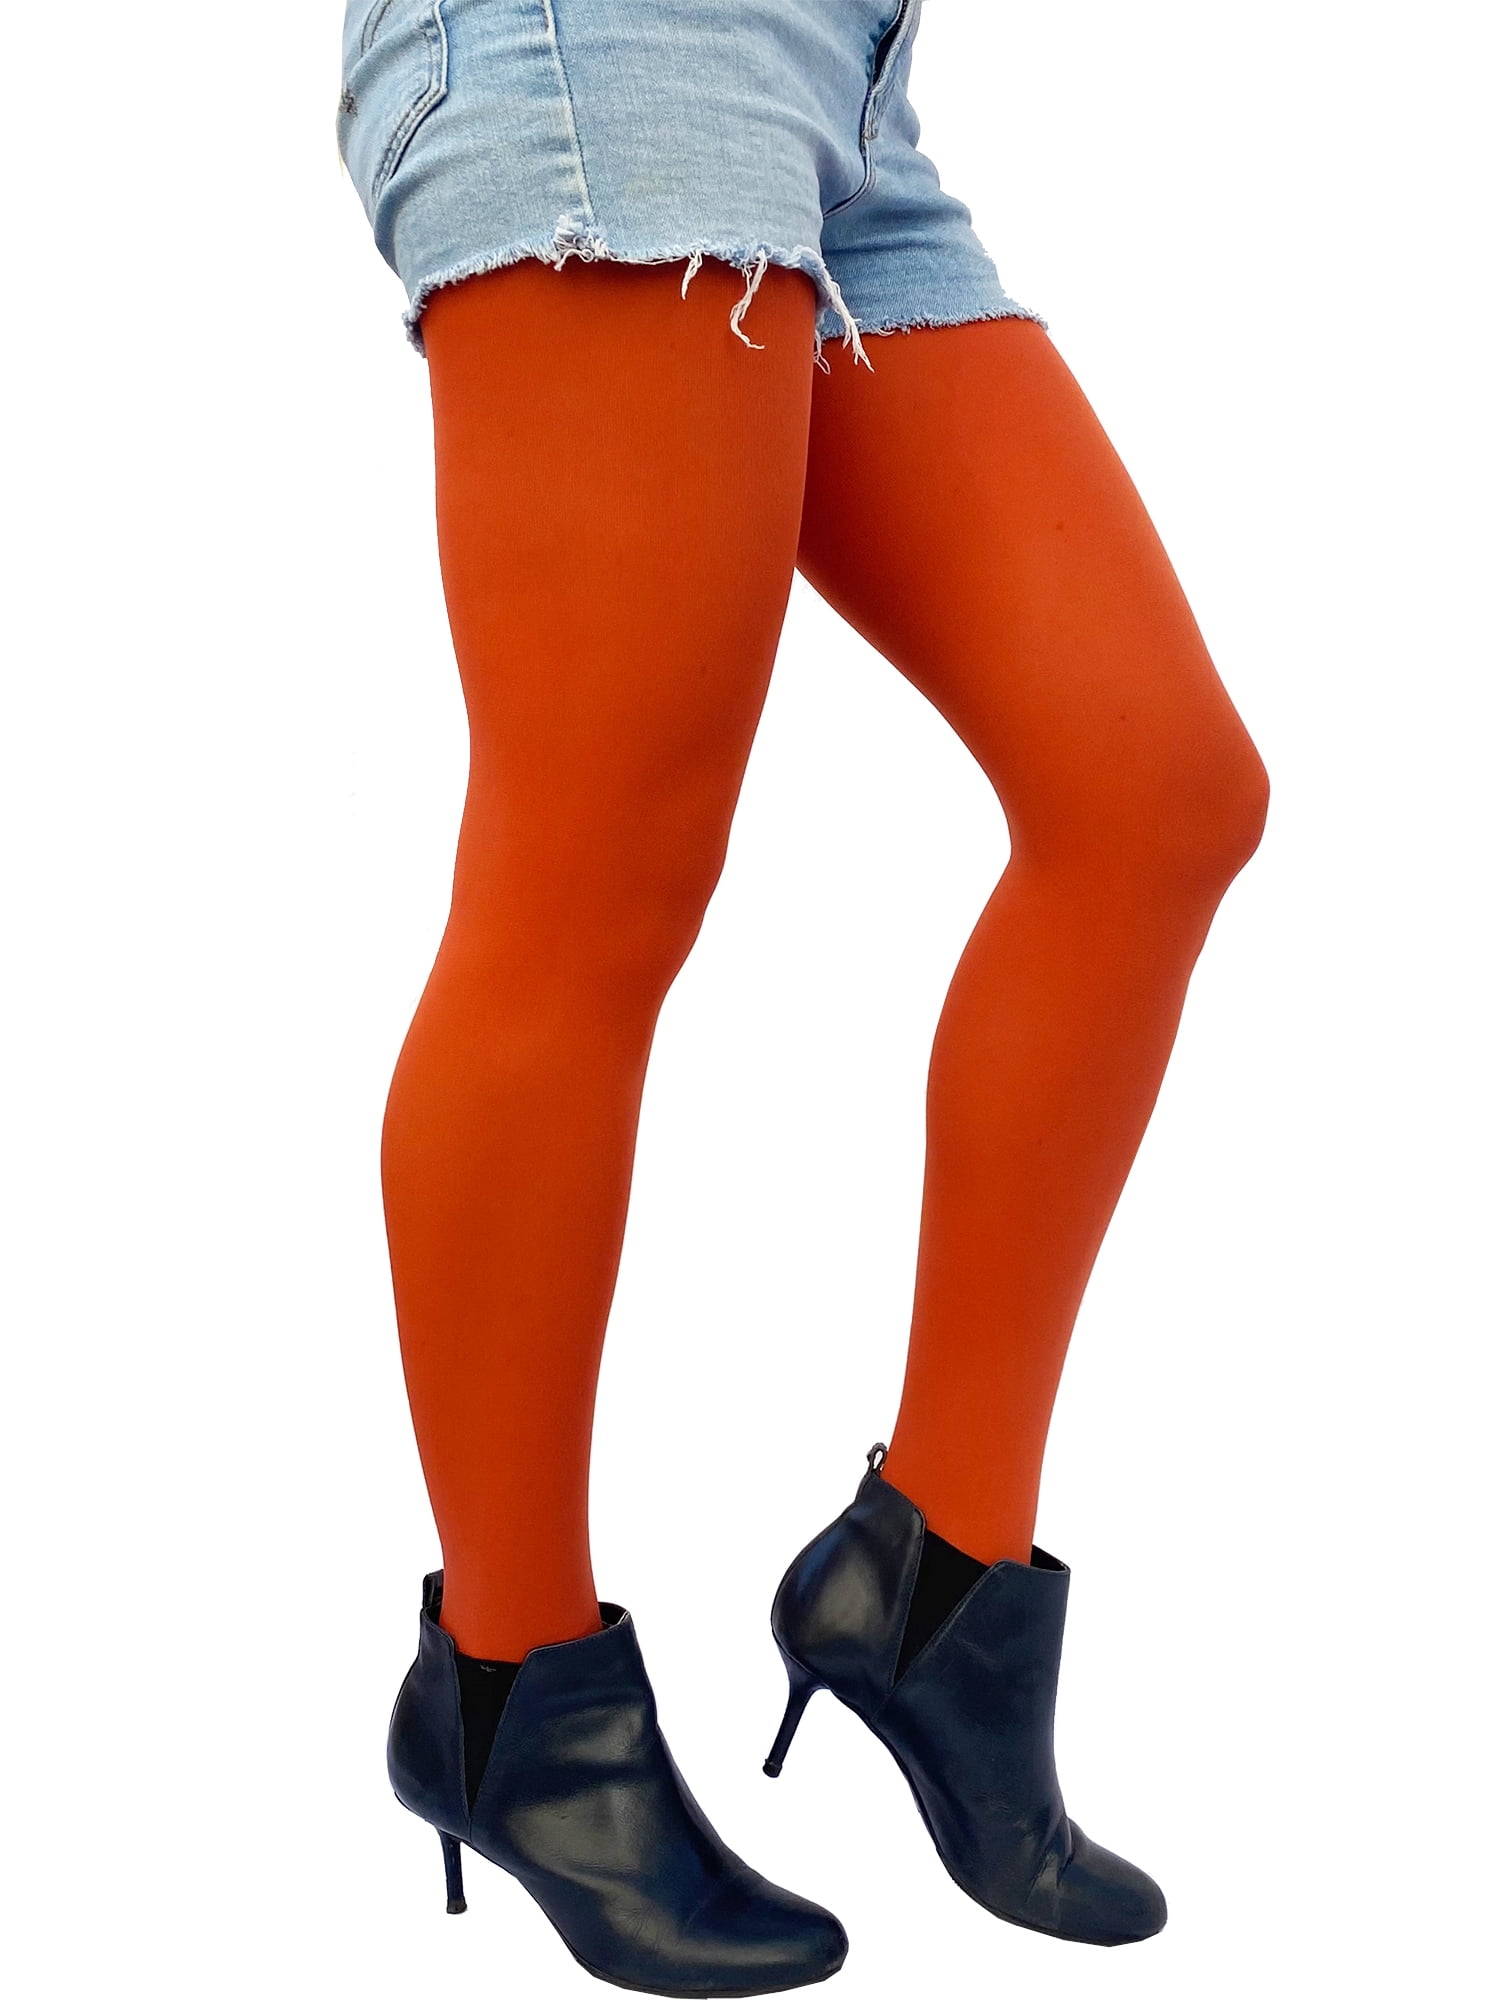 Orange rust Opaque Full Footed Tights, Pantyhose for Women